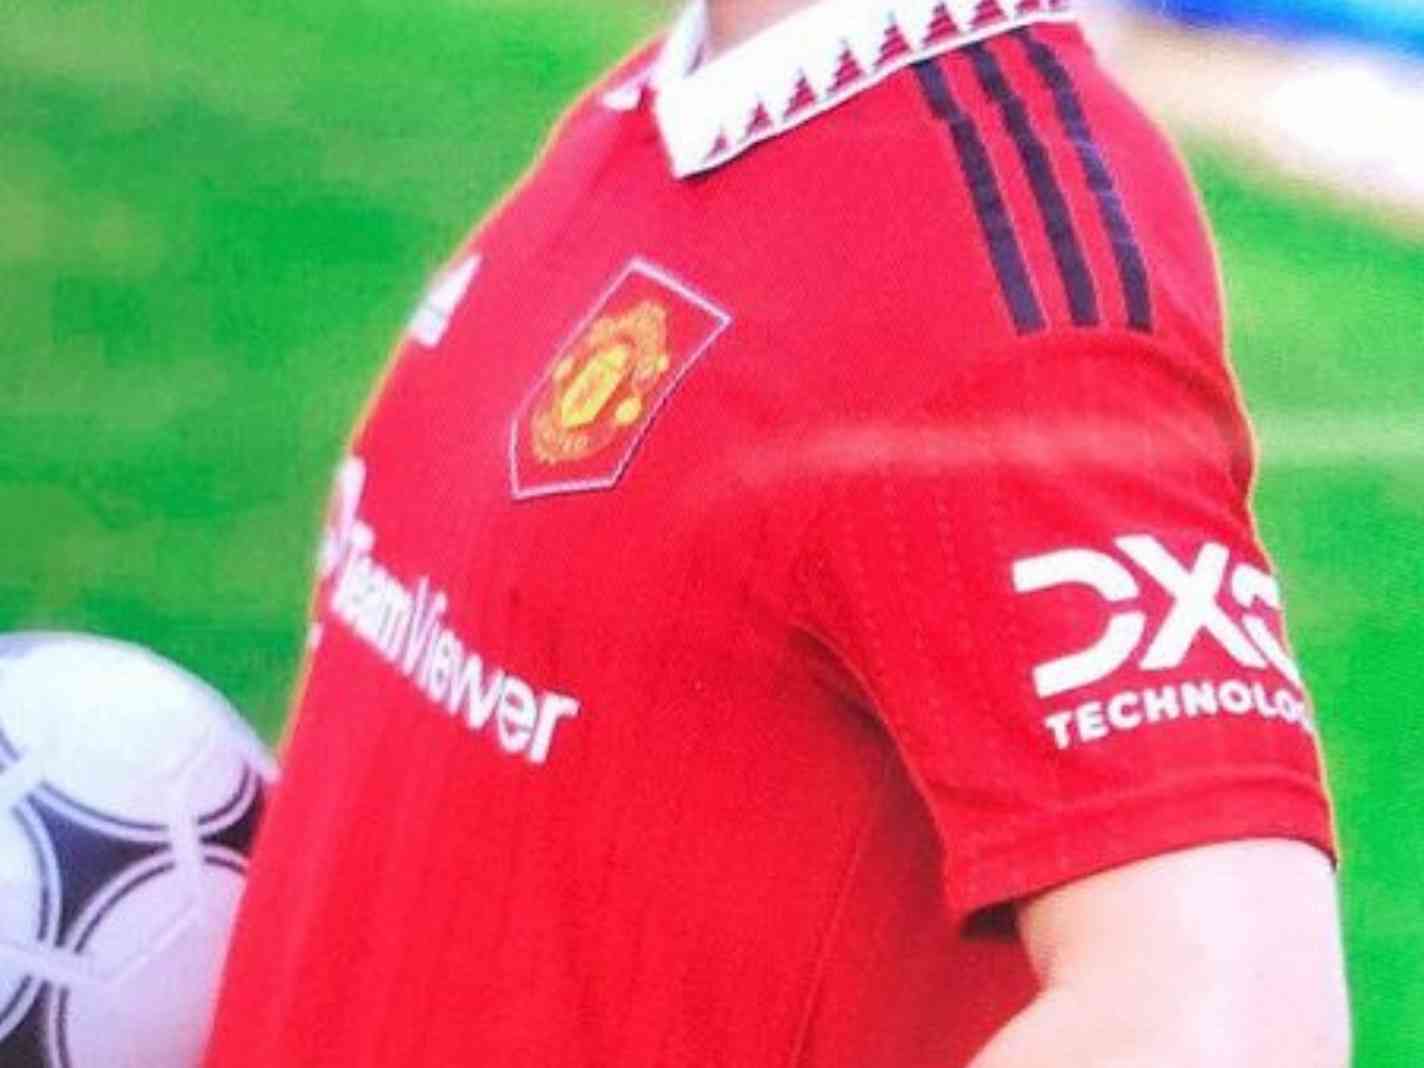 New leak confirms 2022/23 home kit to feature shield around Man United crest